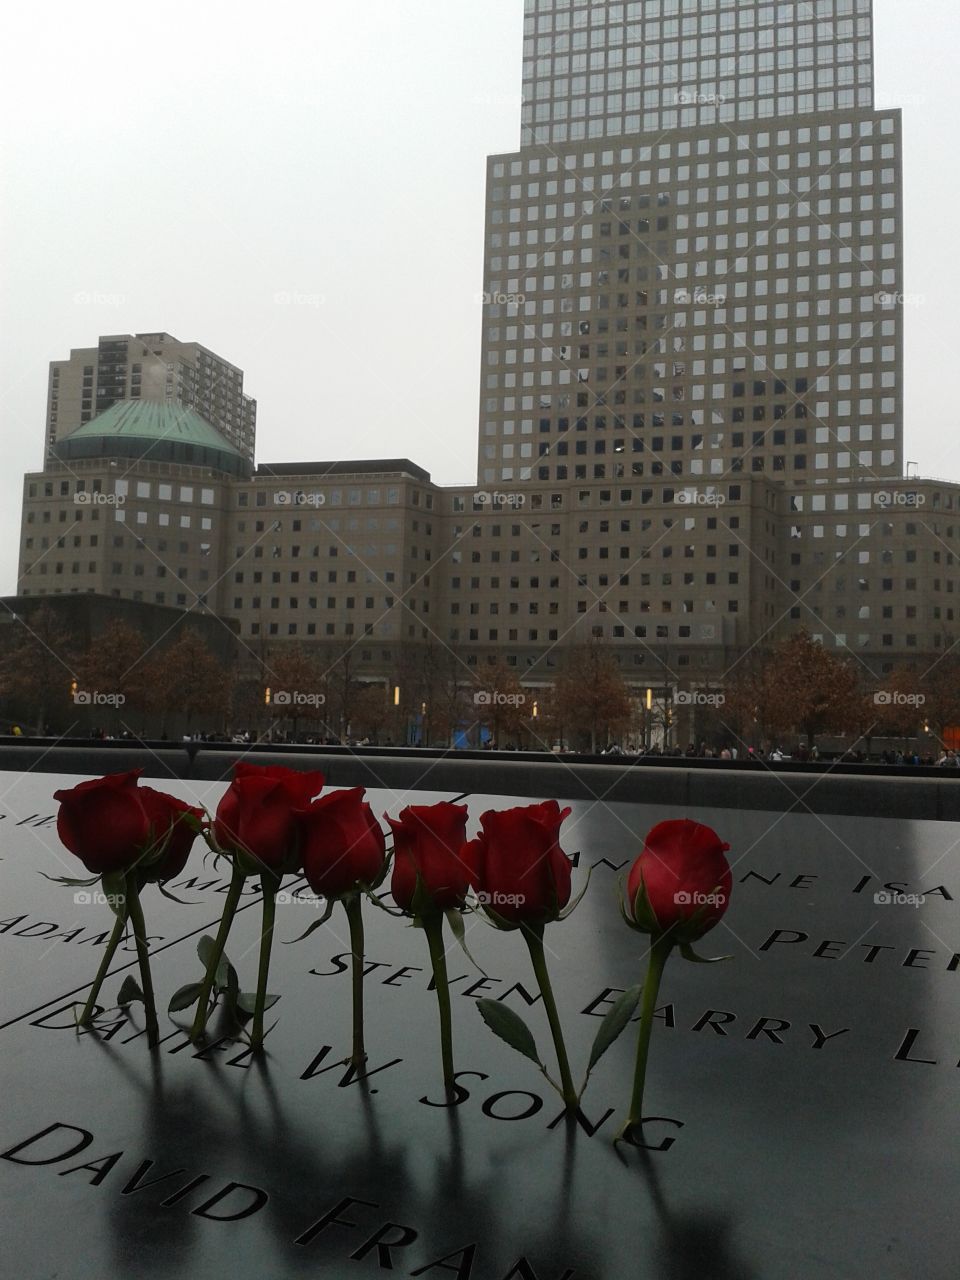 To those who lost their lives on 9/11 #memorial